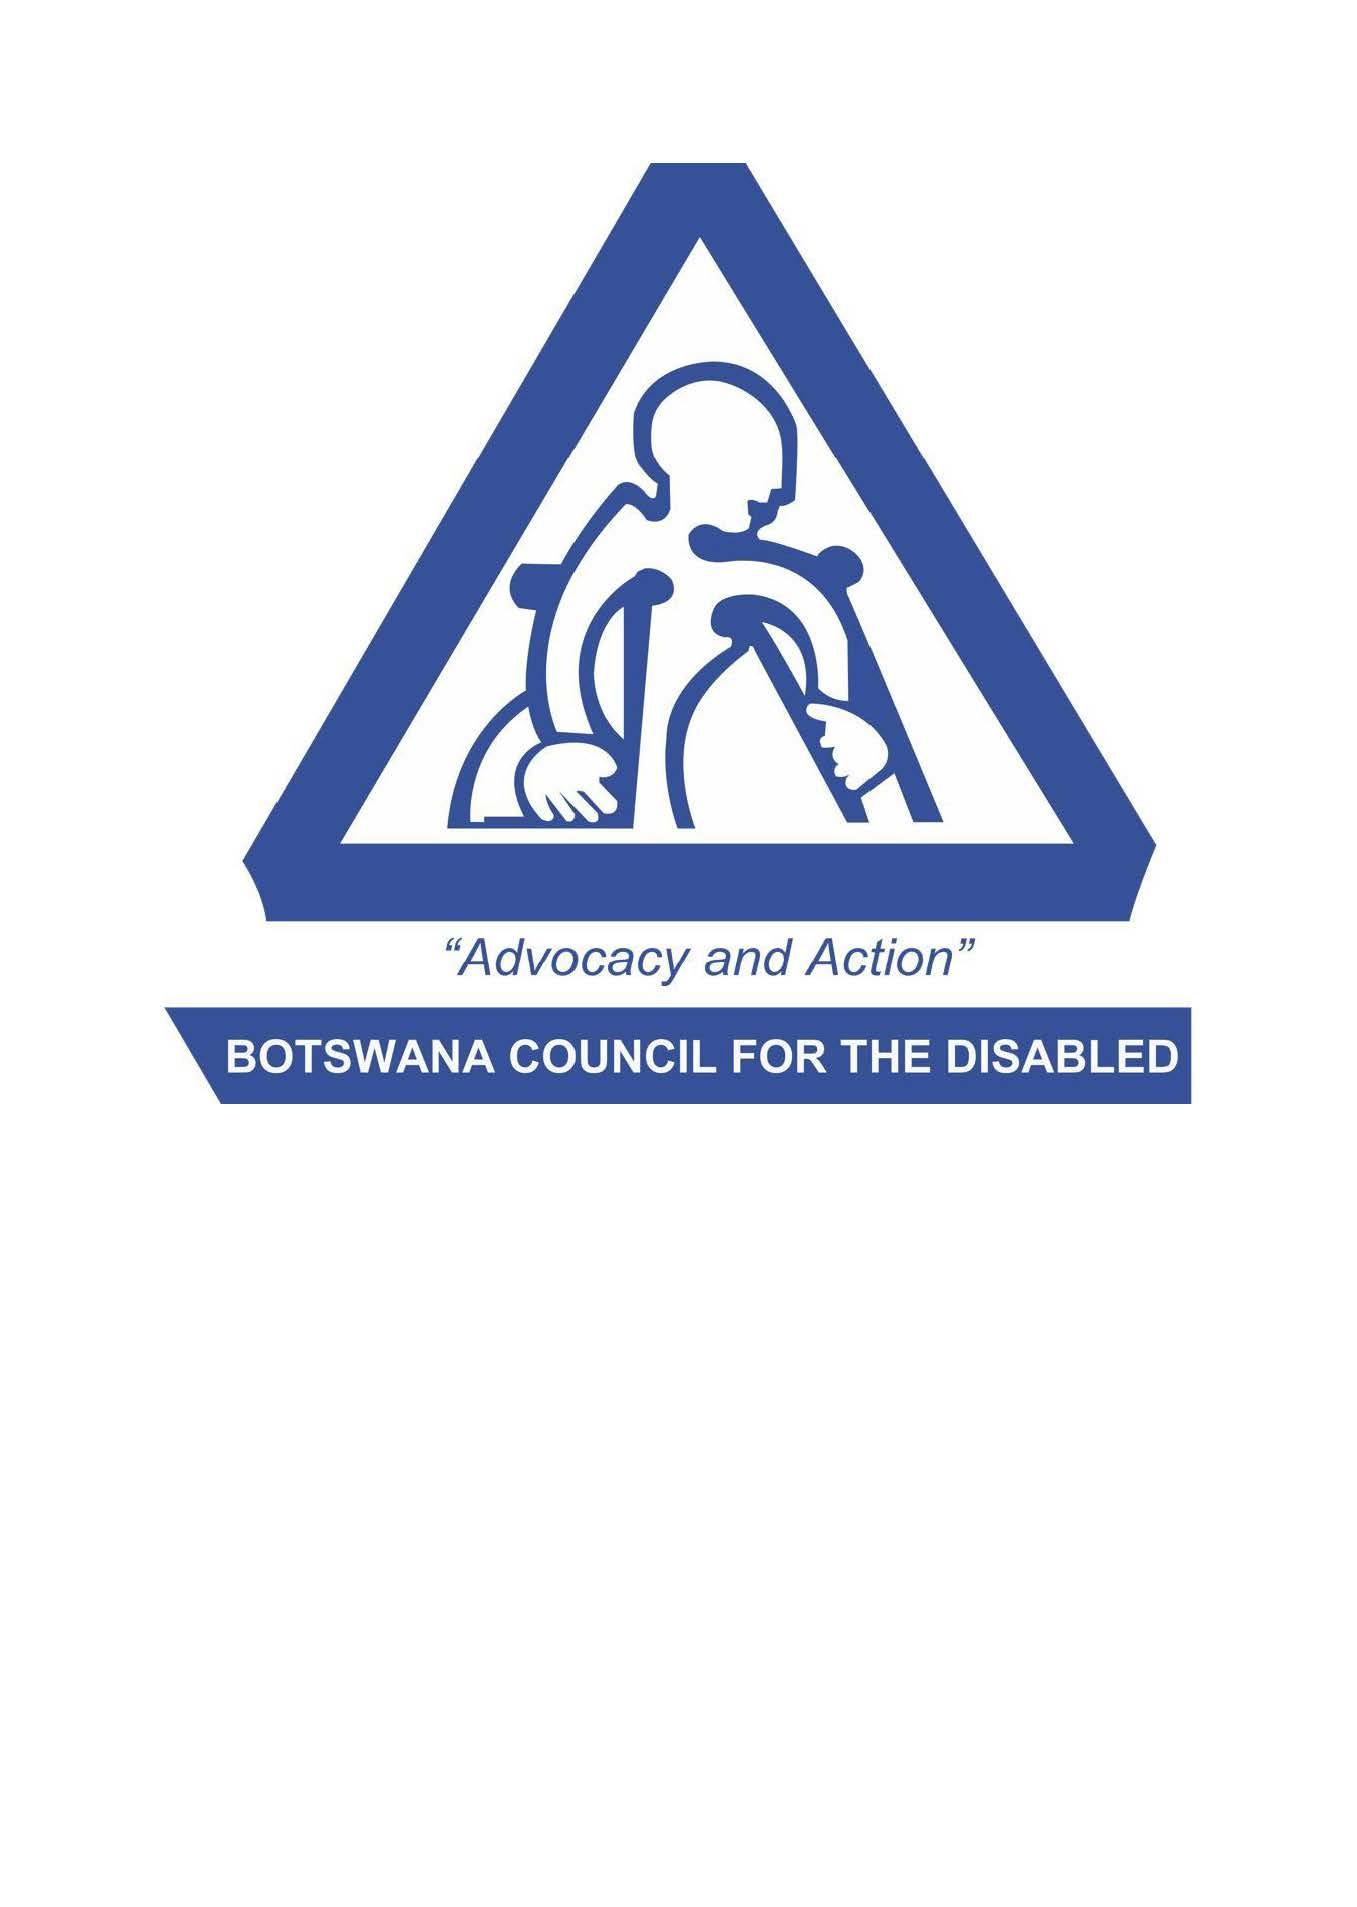 Botswana Council for the Disabled logo